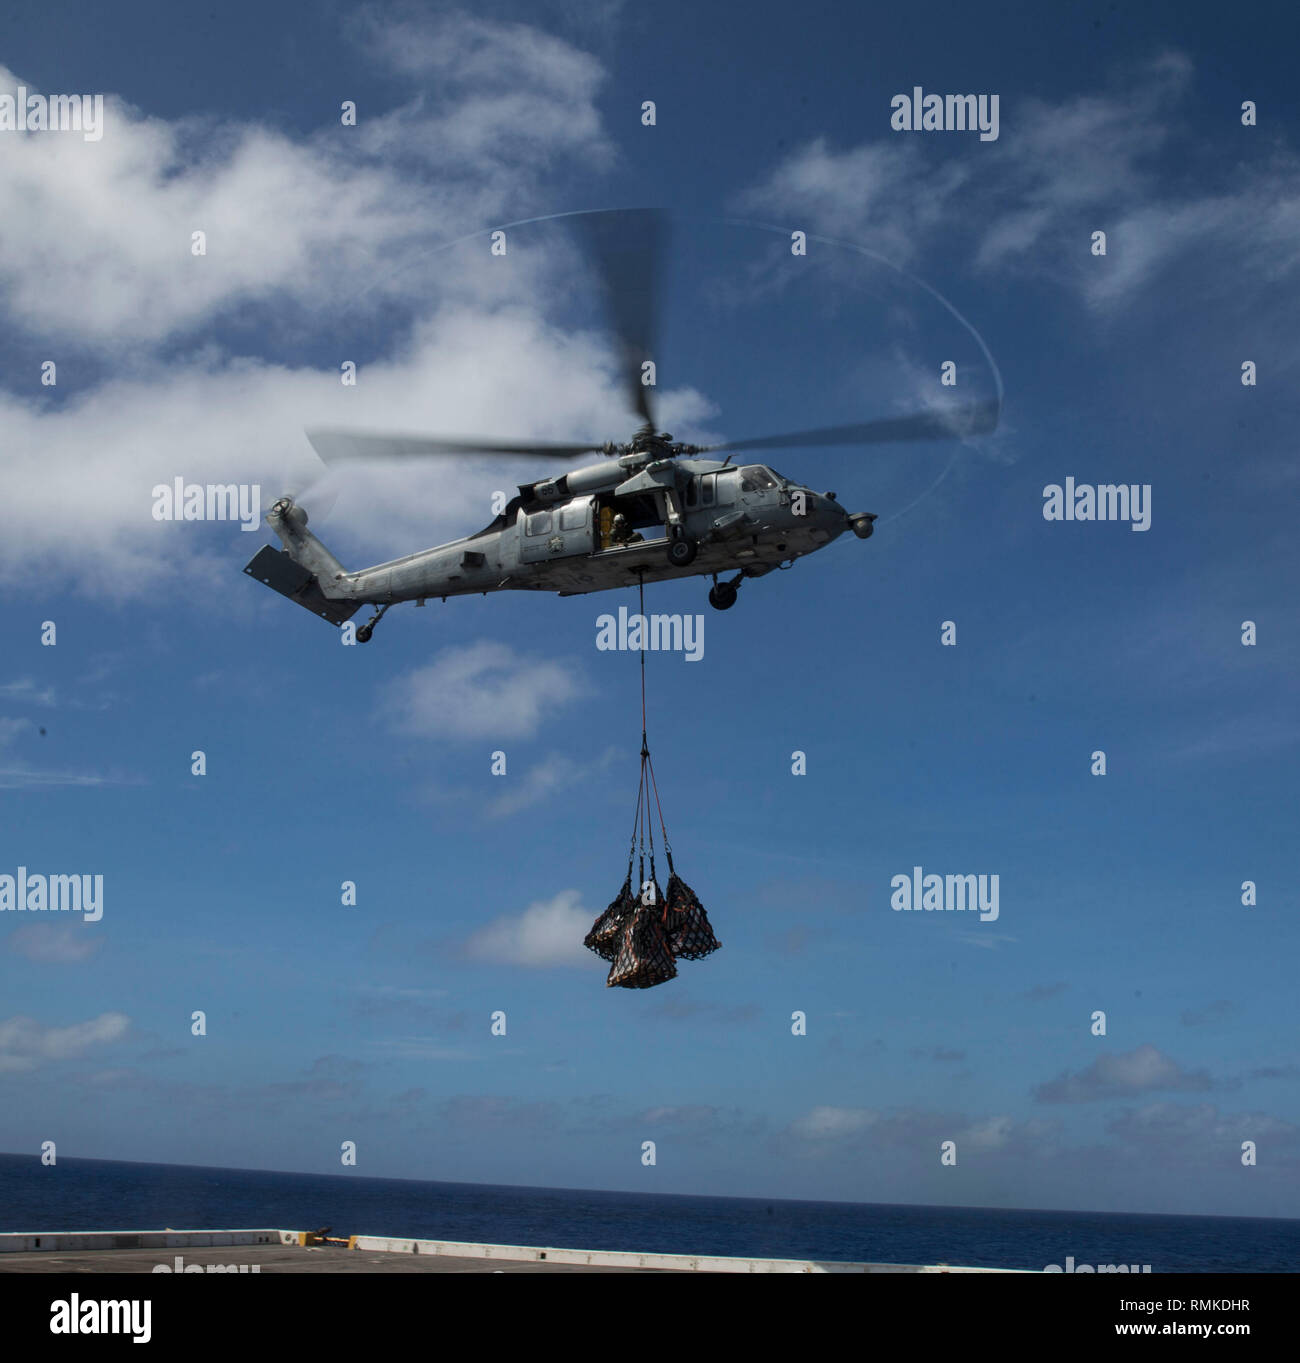 WESTERN PACIFIC (Feb. 7, 2019) A U.S. Navy SH-60 Sea Hawk with the 13th Marine Expeditionary Unit (MEU), conducts an aerial replenishment-at-sea aboard the San Antonio-class amphibious transport dock USS Anchorage (LPD 23) while on a deployment of the Essex Amphibious Ready Group (ARG) and 13th MEU. The Essex ARG/13th MEU is a capable and lethal Navy-Marine Corps team deployed to the U.S. 7th Fleet area of operations to support regional stability, reassure partners and allies and maintain a presence postured to respond to any crisis ranging from humanitarian assistance to contingency operation Stock Photo